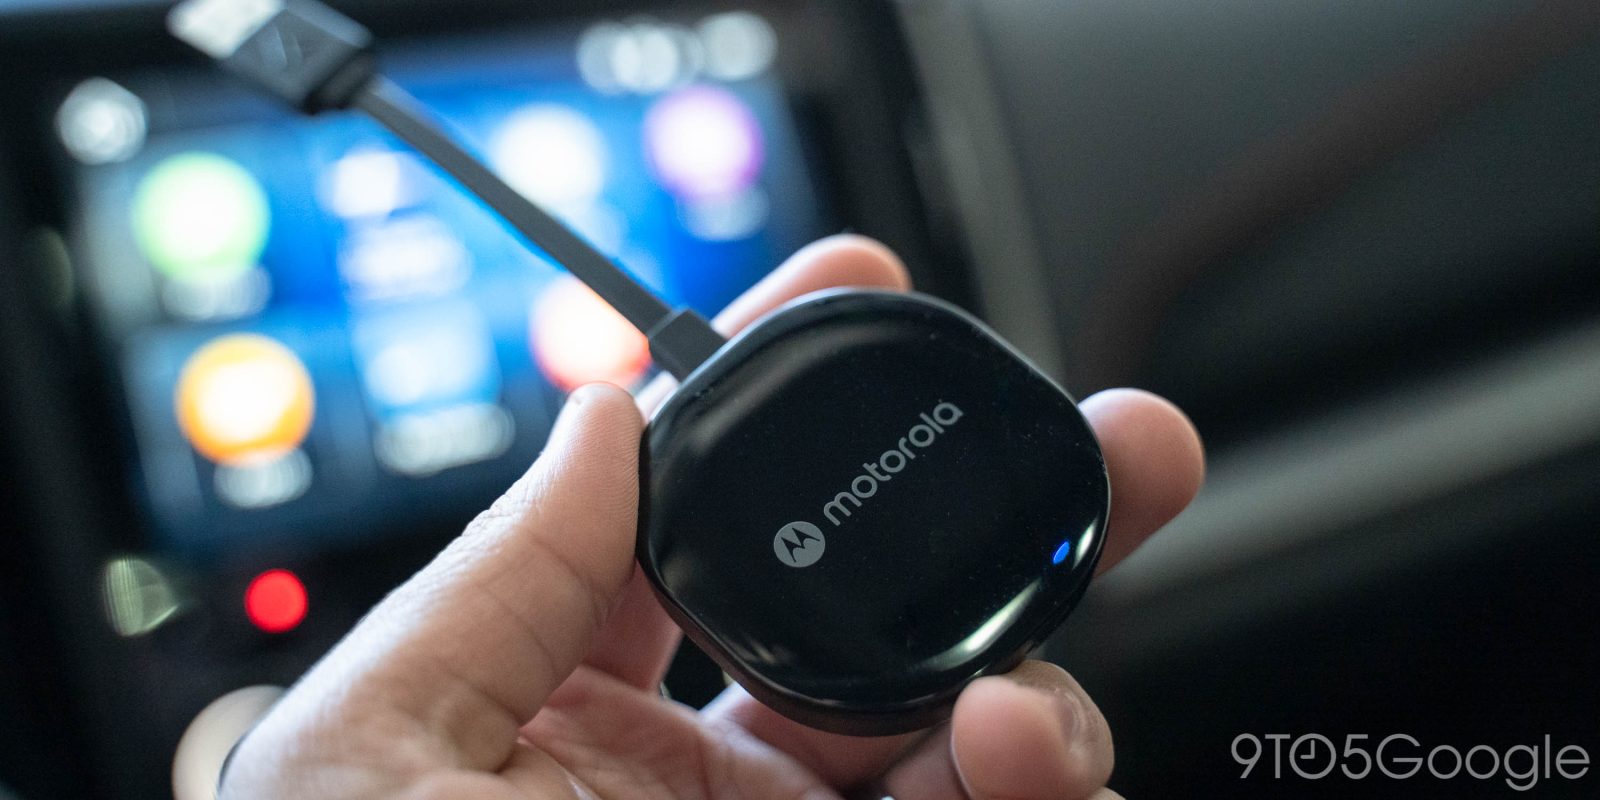 motorola MA1 Wireless Android Auto Car Adapter User Guide